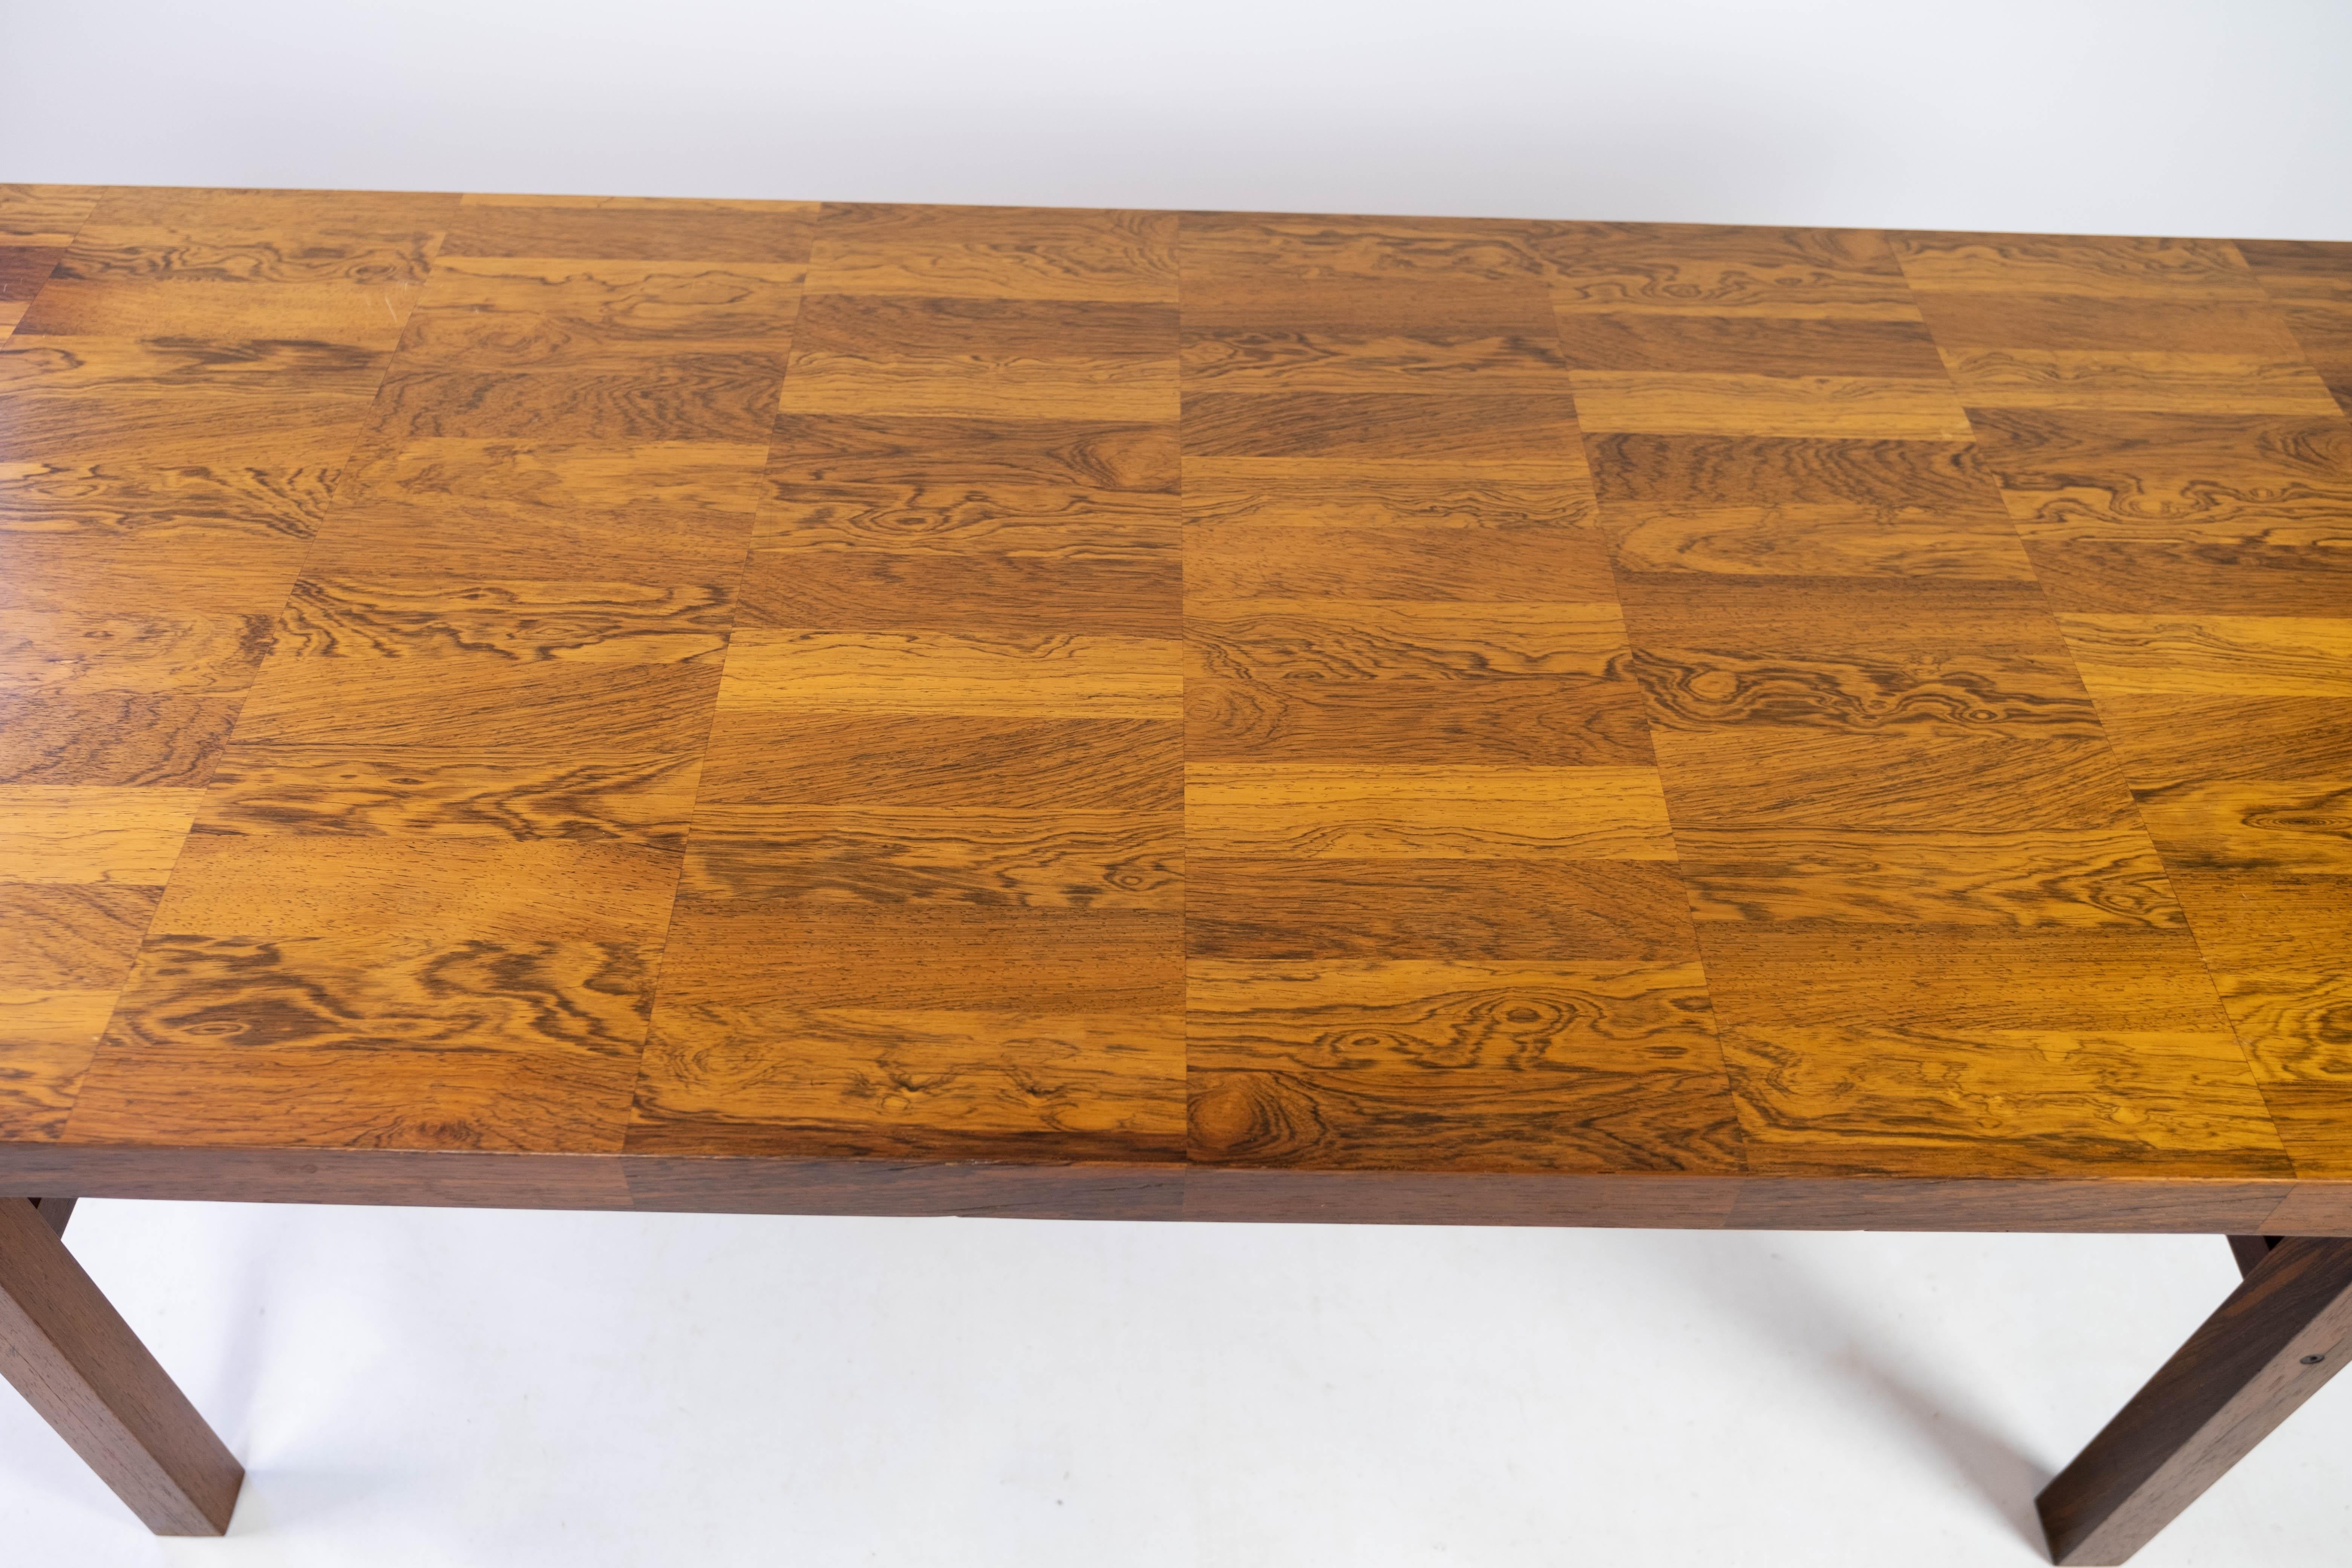 This rosewood coffee table epitomizes the elegance and craftsmanship of Danish design from the 1960s. Crafted with precision and attention to detail, it boasts a timeless appeal that adds sophistication to any living space.

The rich tones and grain